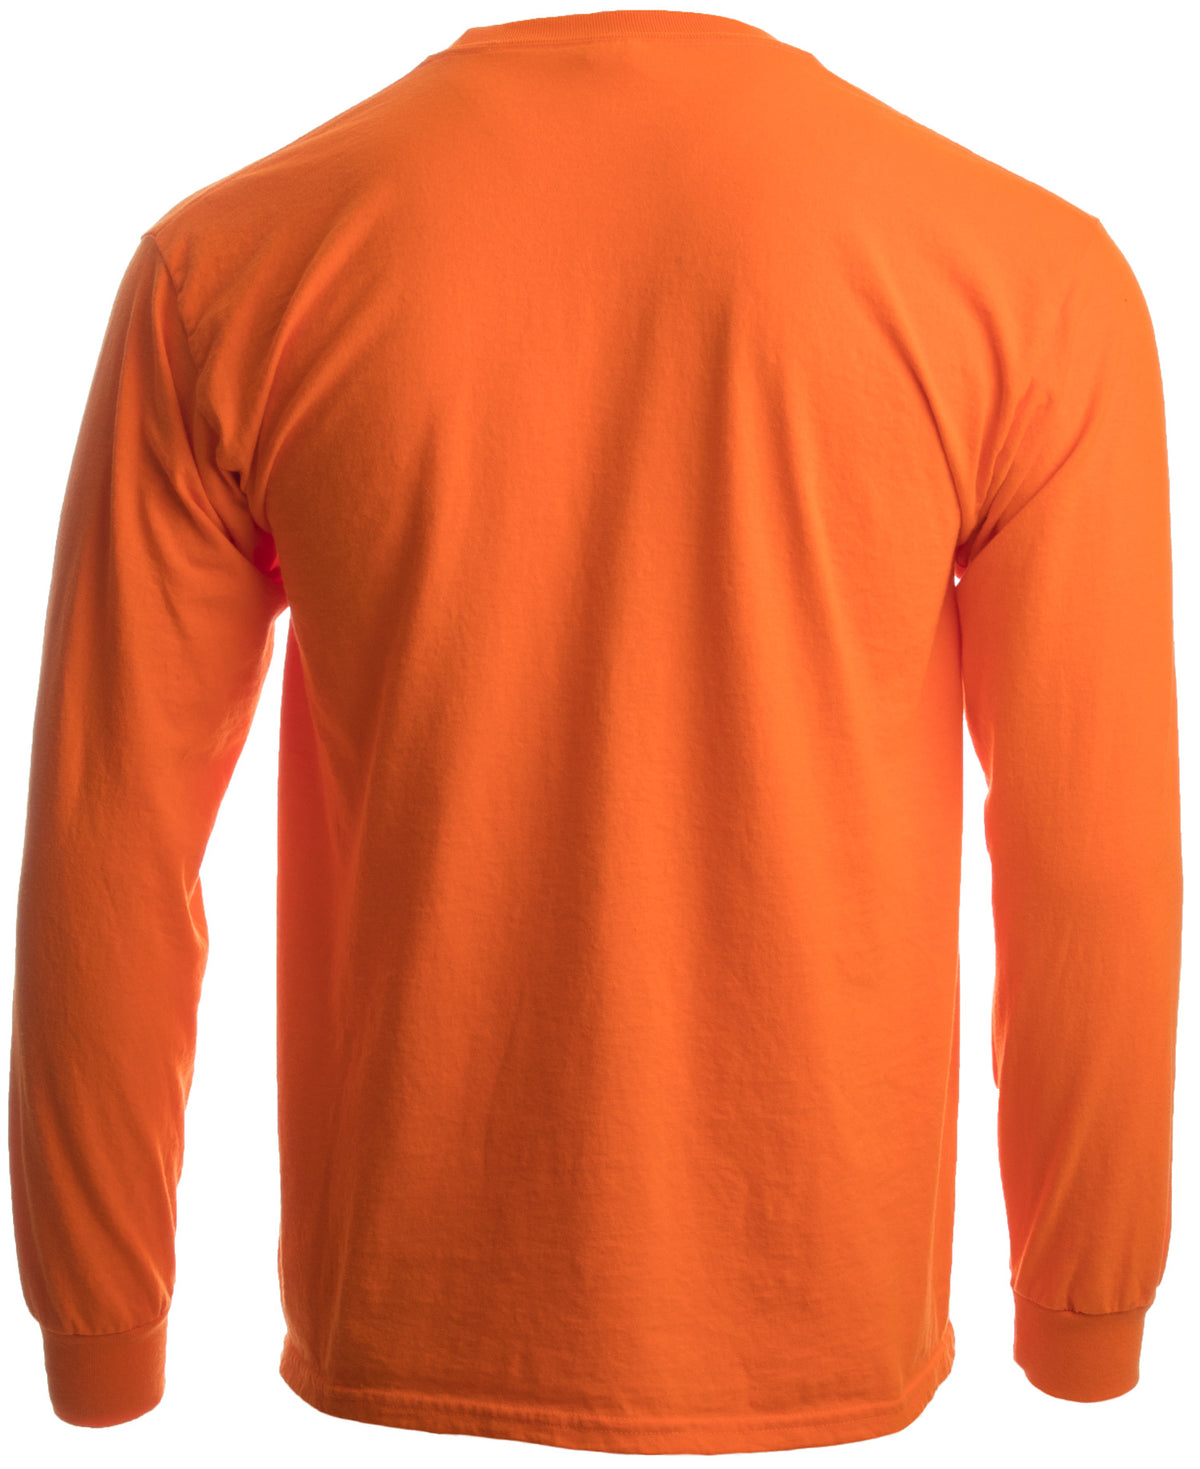 This is my Deer Hunting Shirt | Funny Hunter Blaze Orange Safety Clothes T-shirt